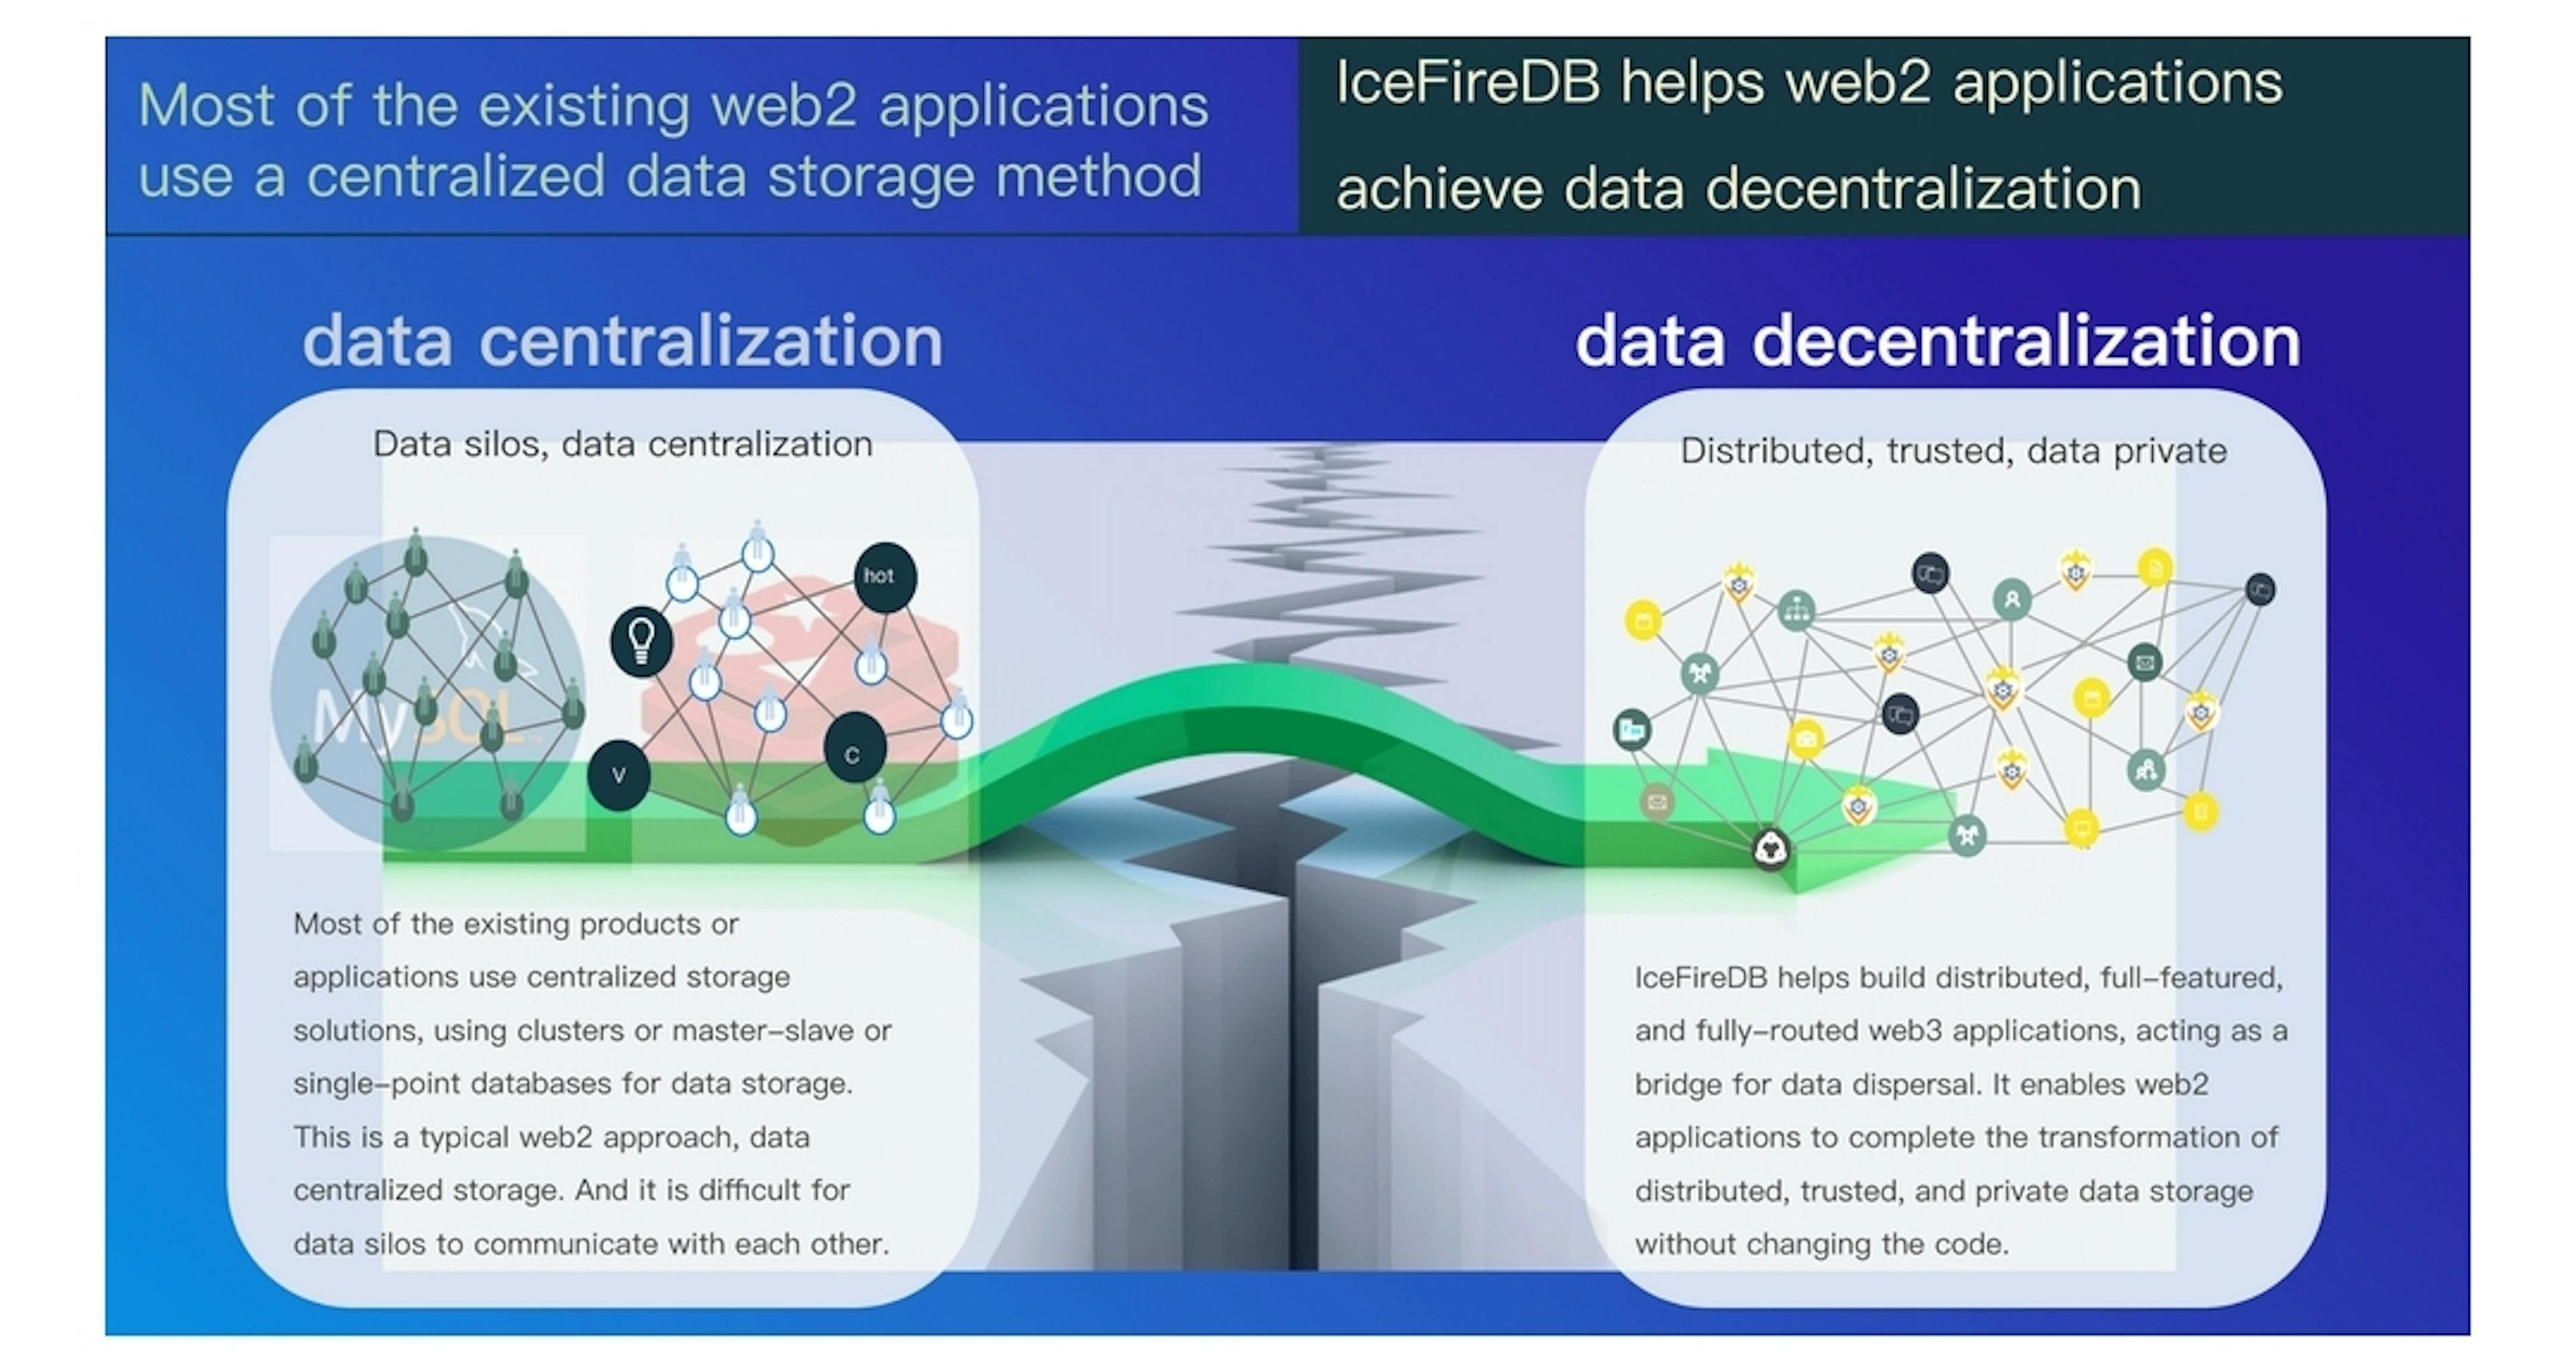 IceFireDB is providing Web3 solutions to also Web2 applications 